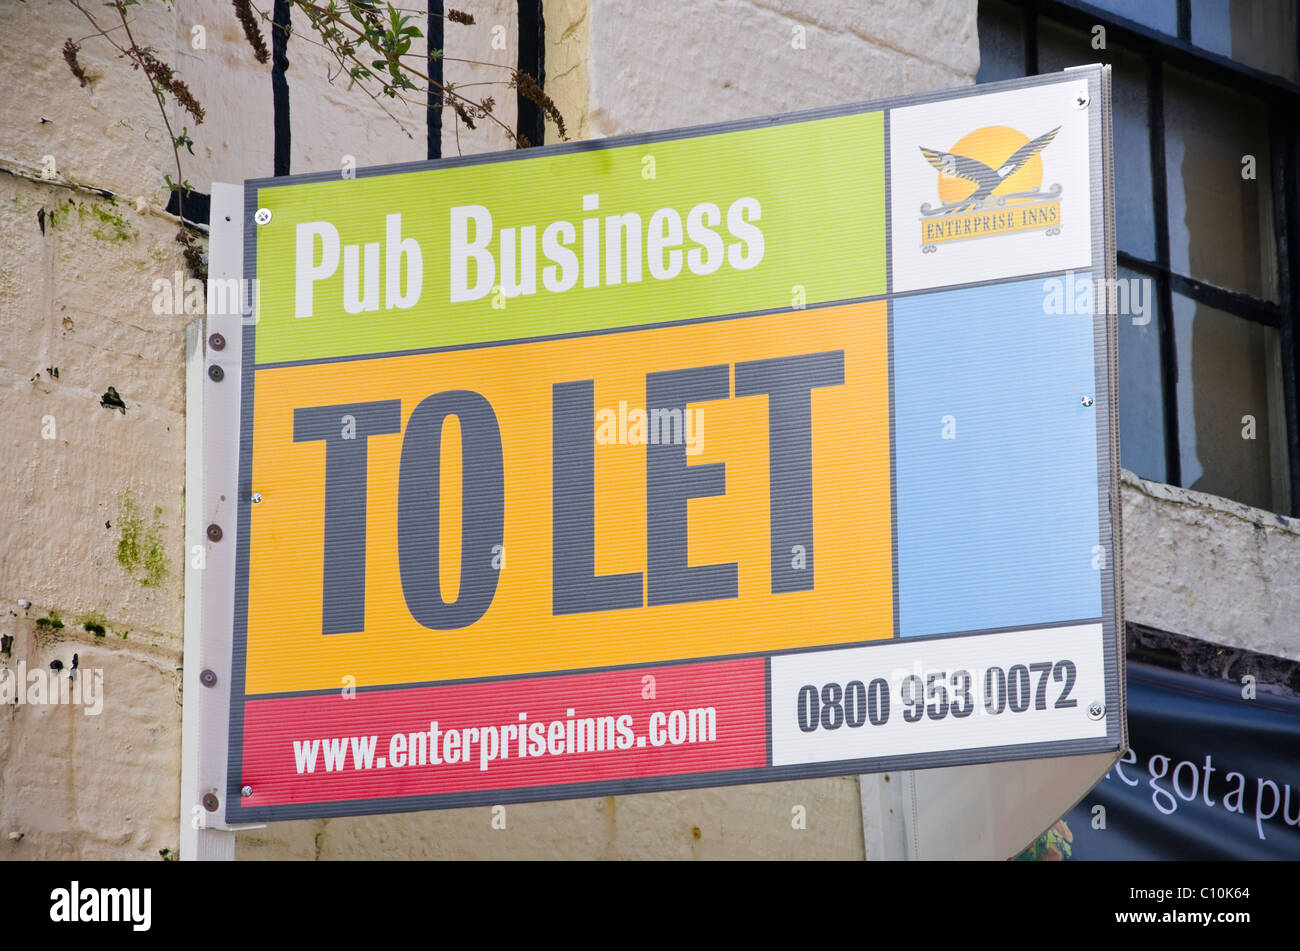 Wales, UK, Europe. Estate agent's Pub Business to Let sign Stock Photo